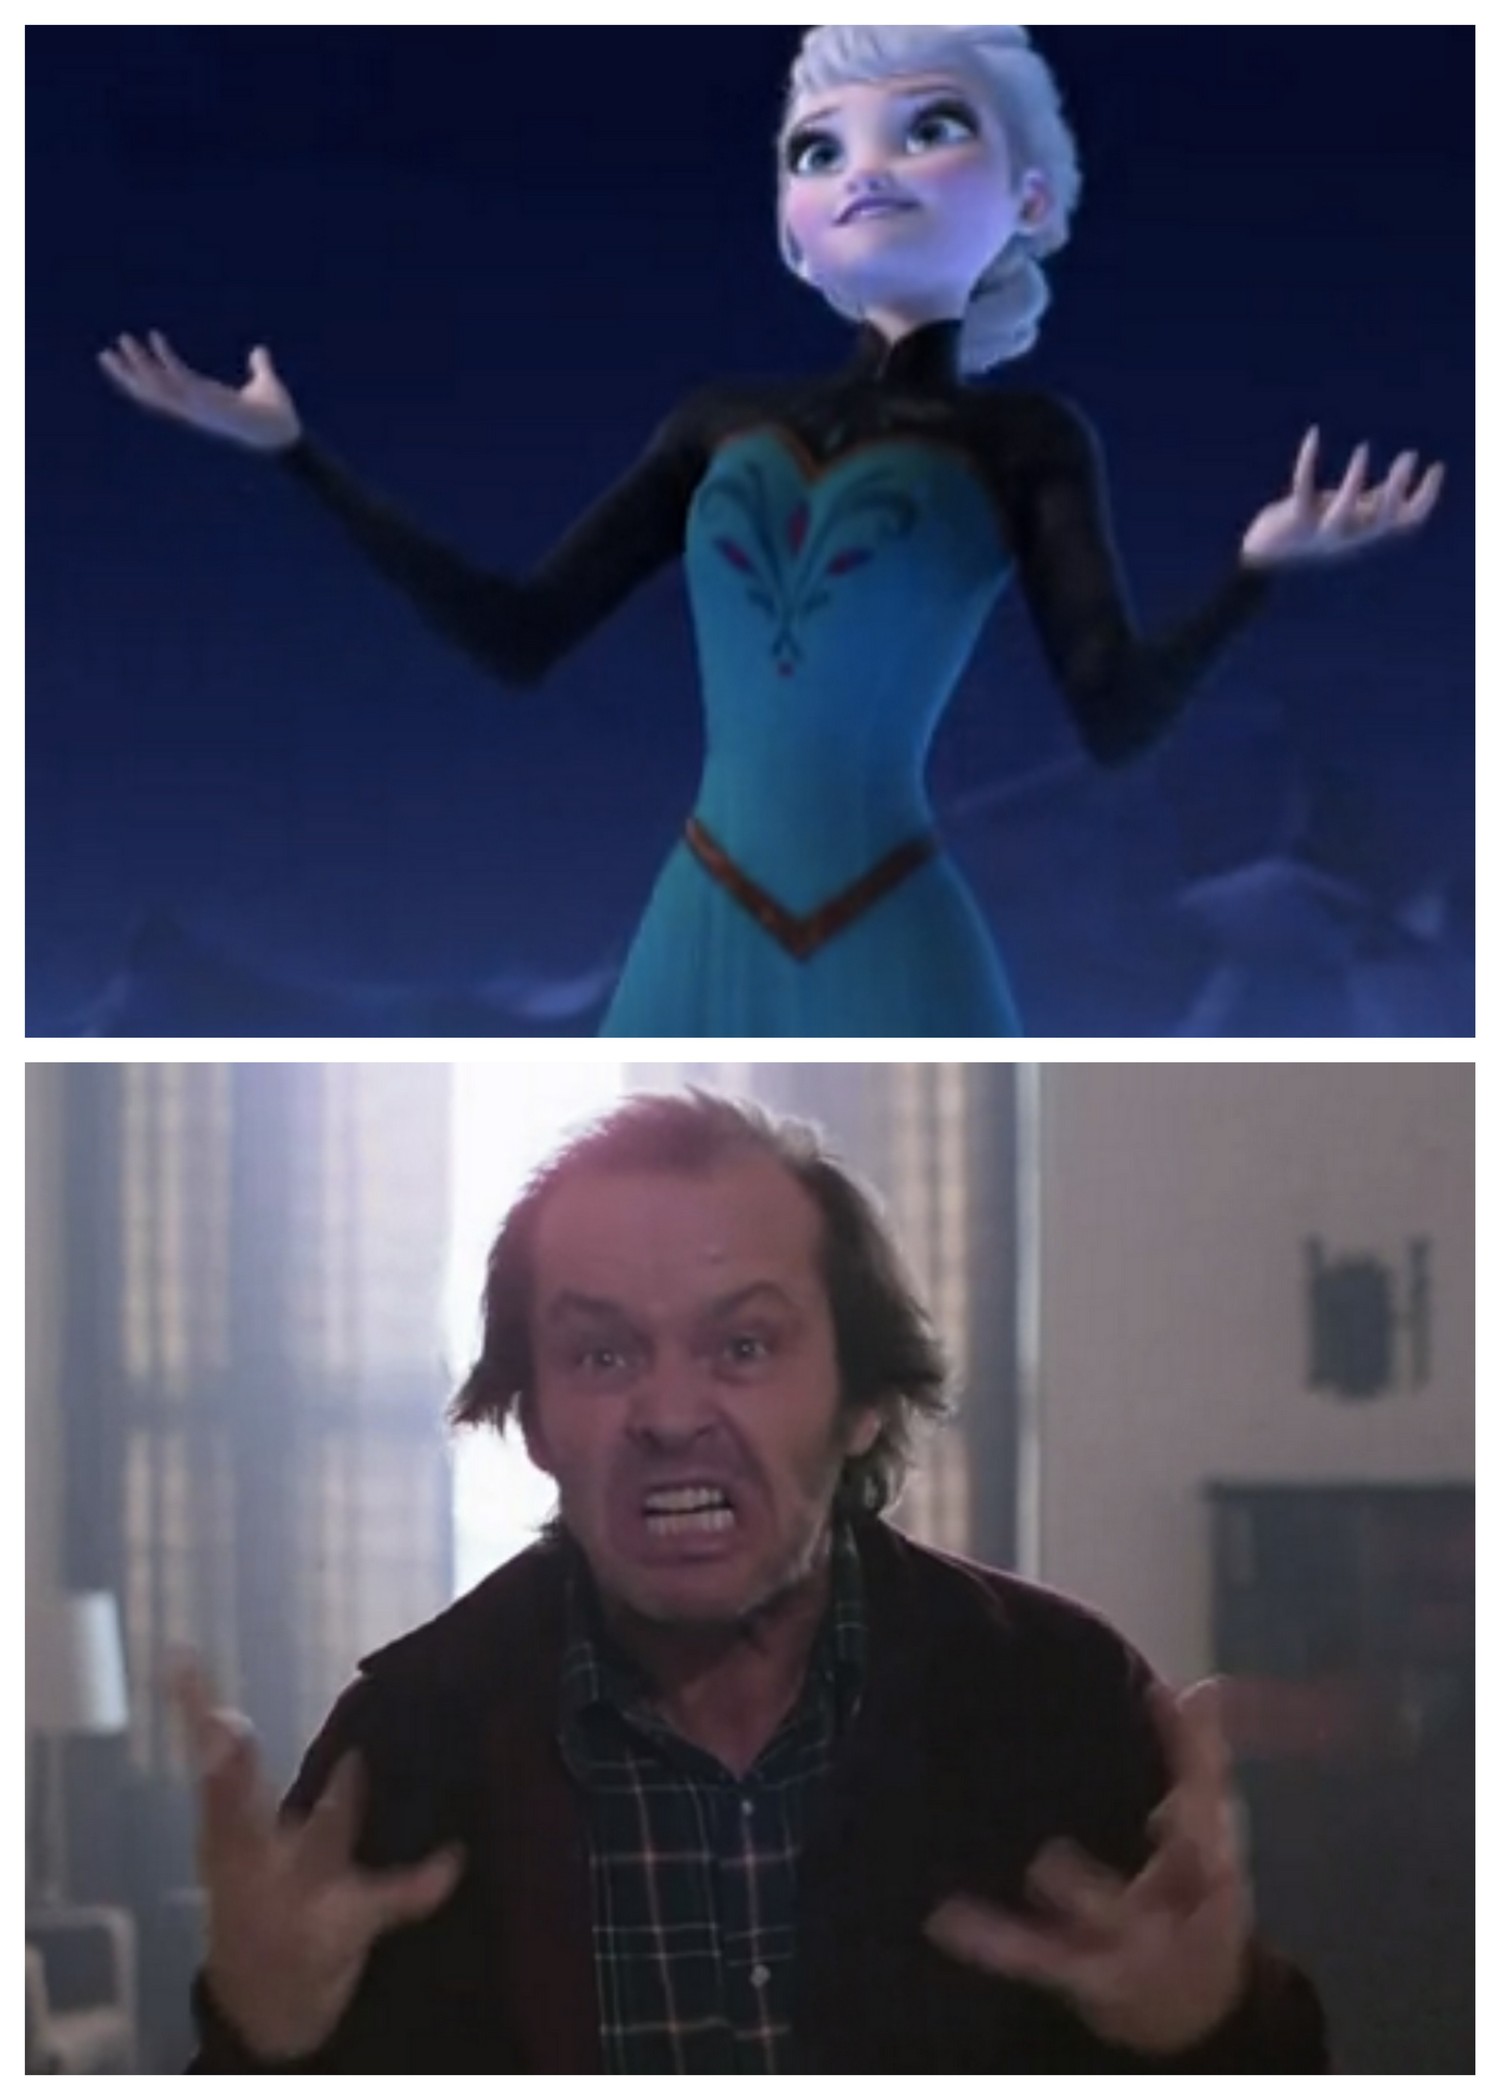 Disney's Frozen and The Shining Conspiracy - head -